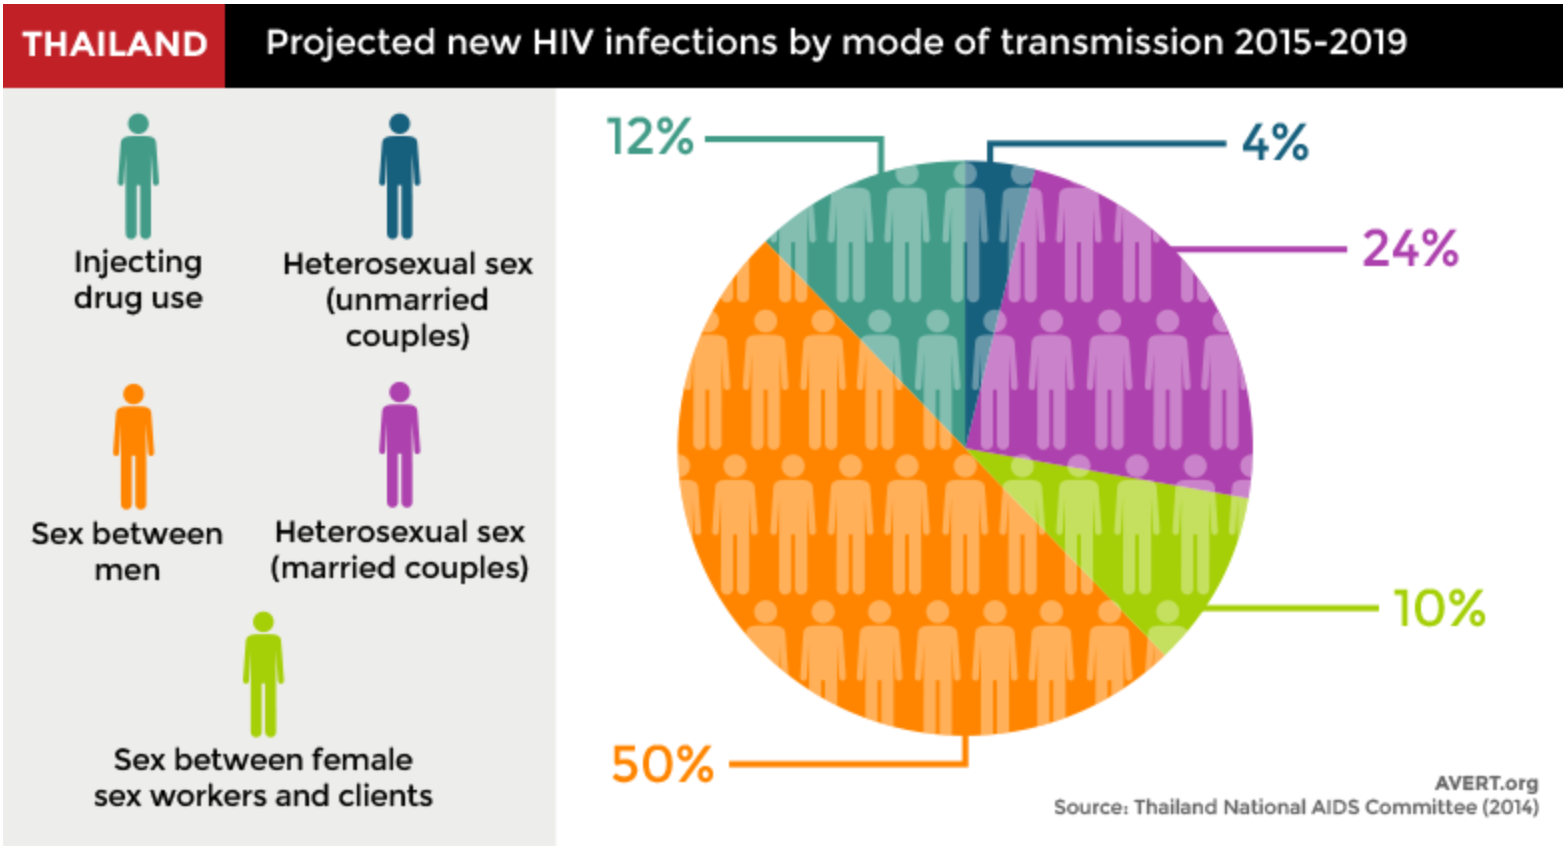 HIV infection by mode of transmission in Thailand 